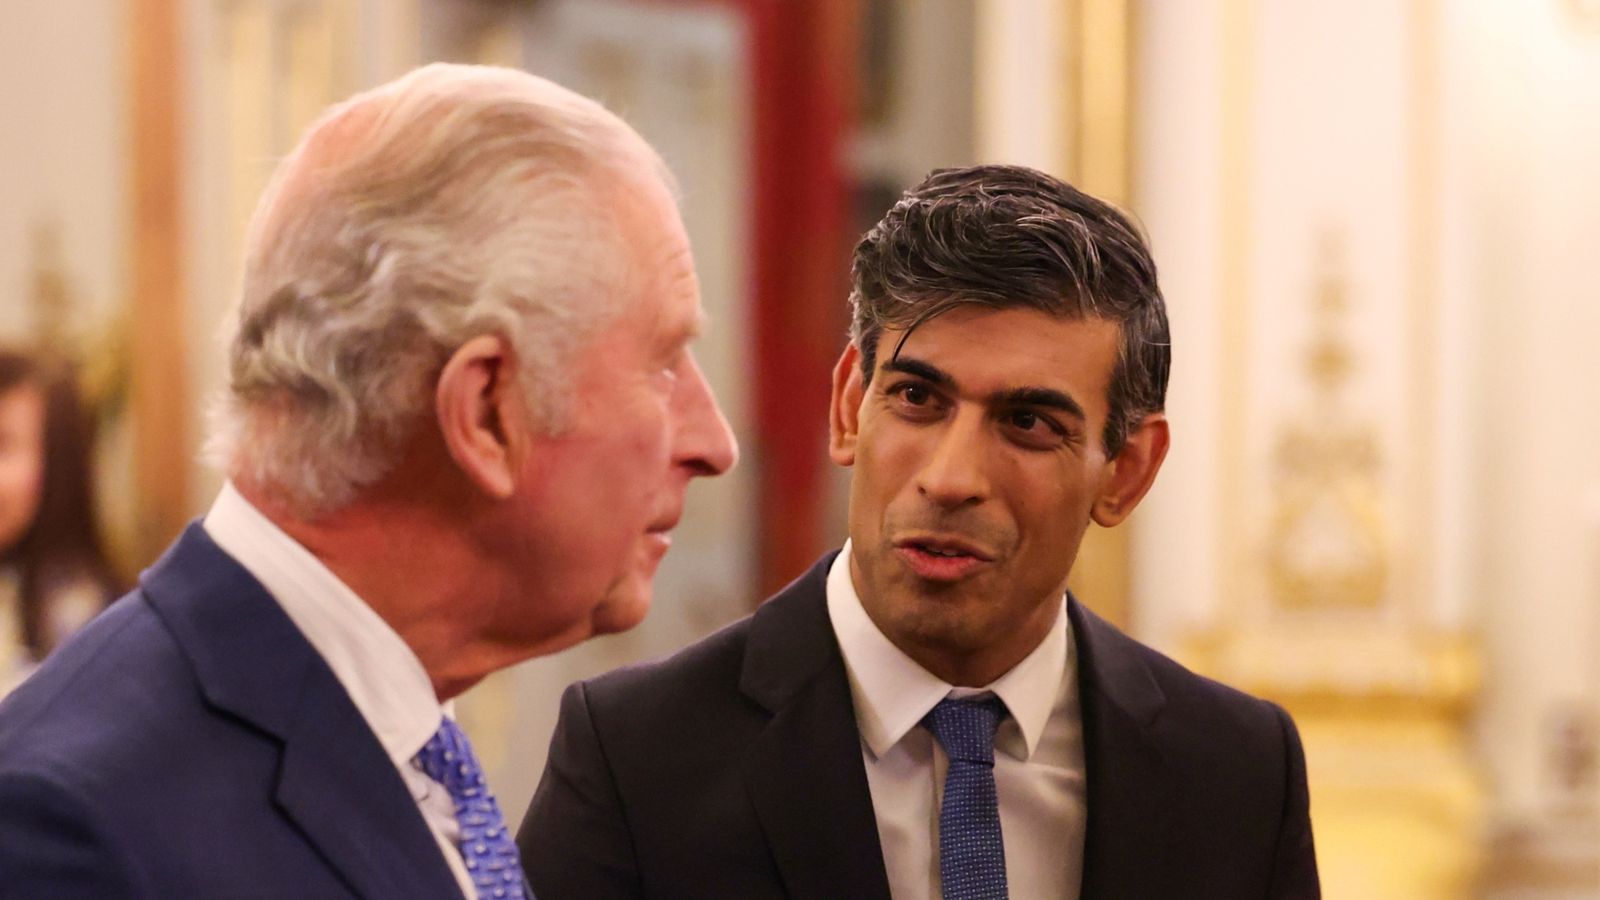 Rishi Sunak criticised for 'surprise' honours list including major Tory donor Mohamed Mansour